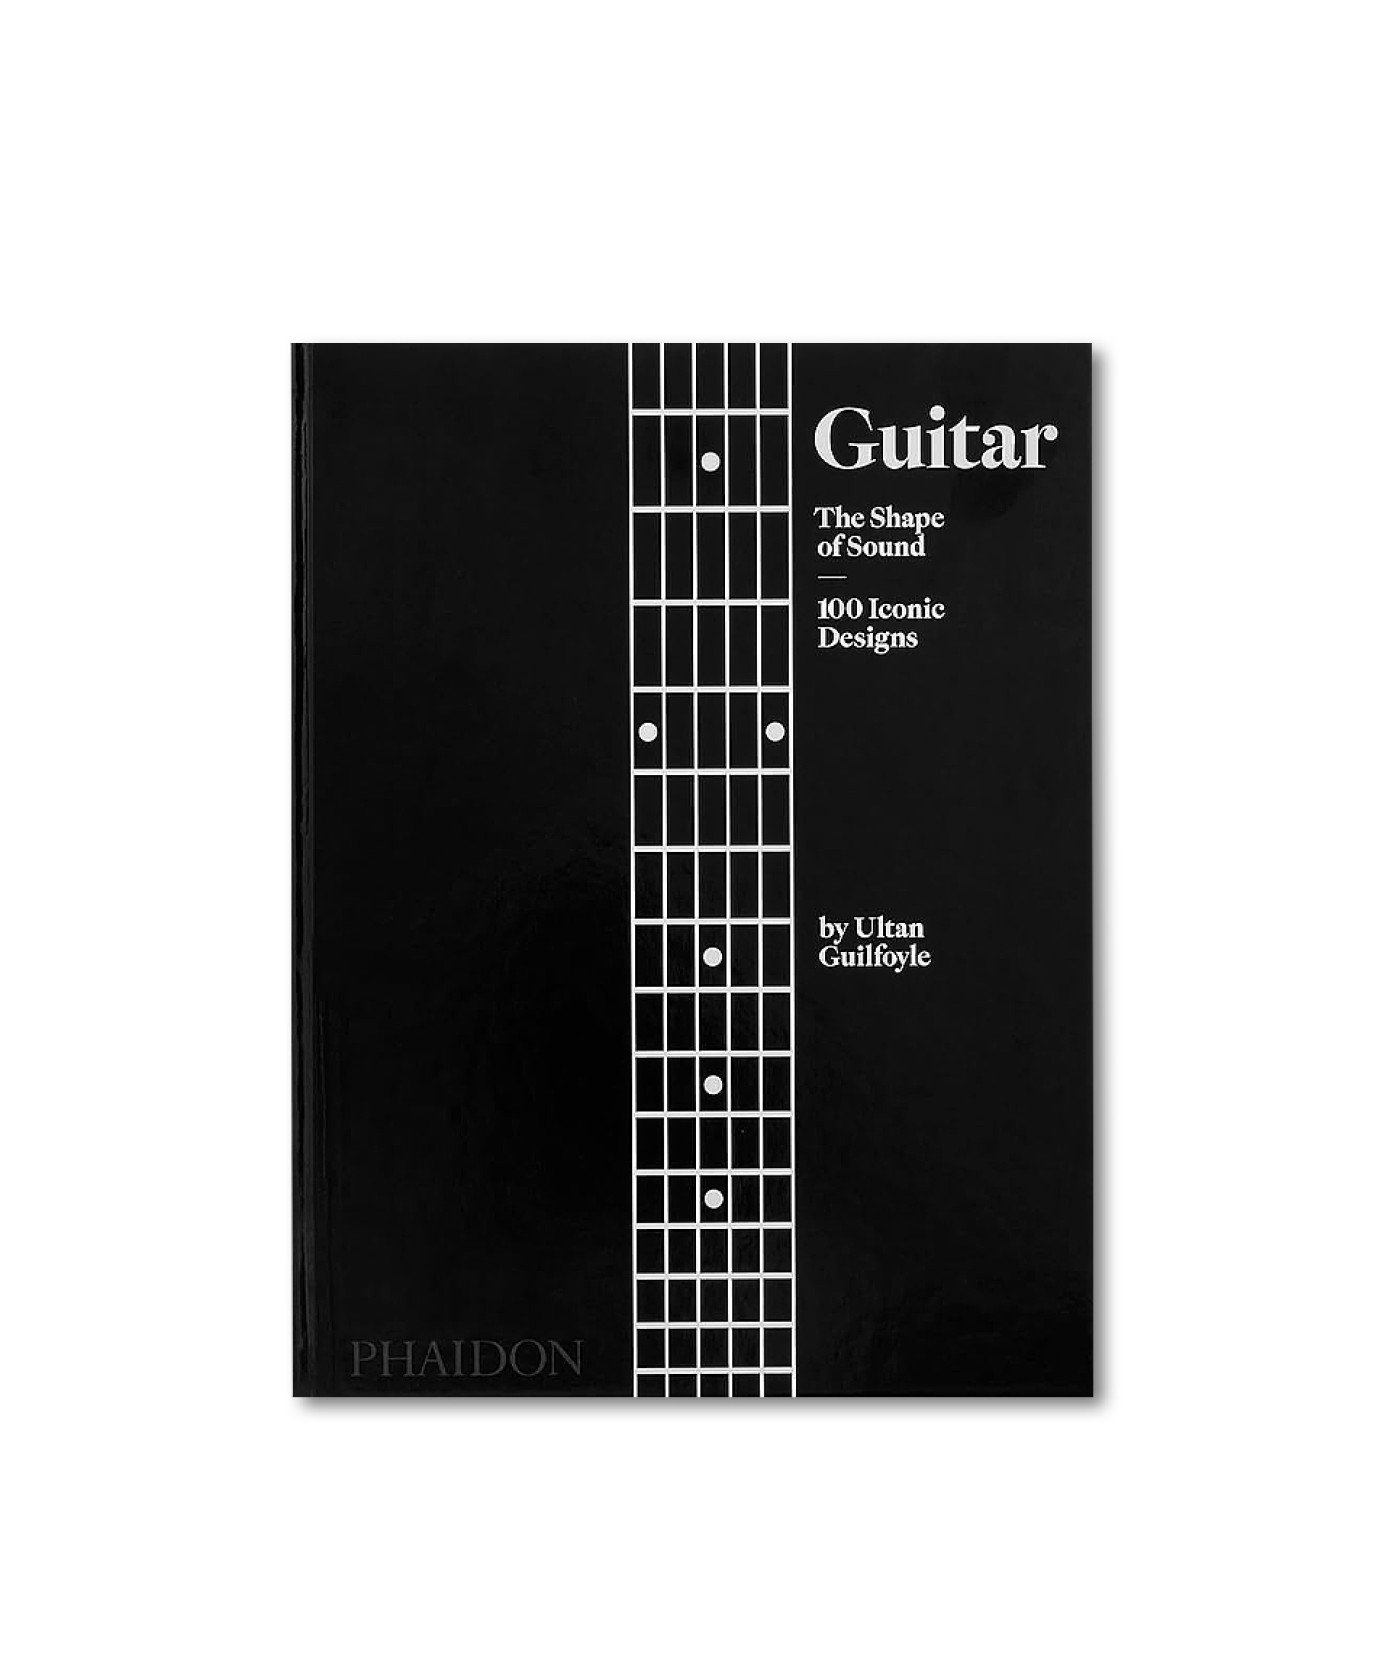 Guitar The Shape of Sound (100 Iconic Designs)